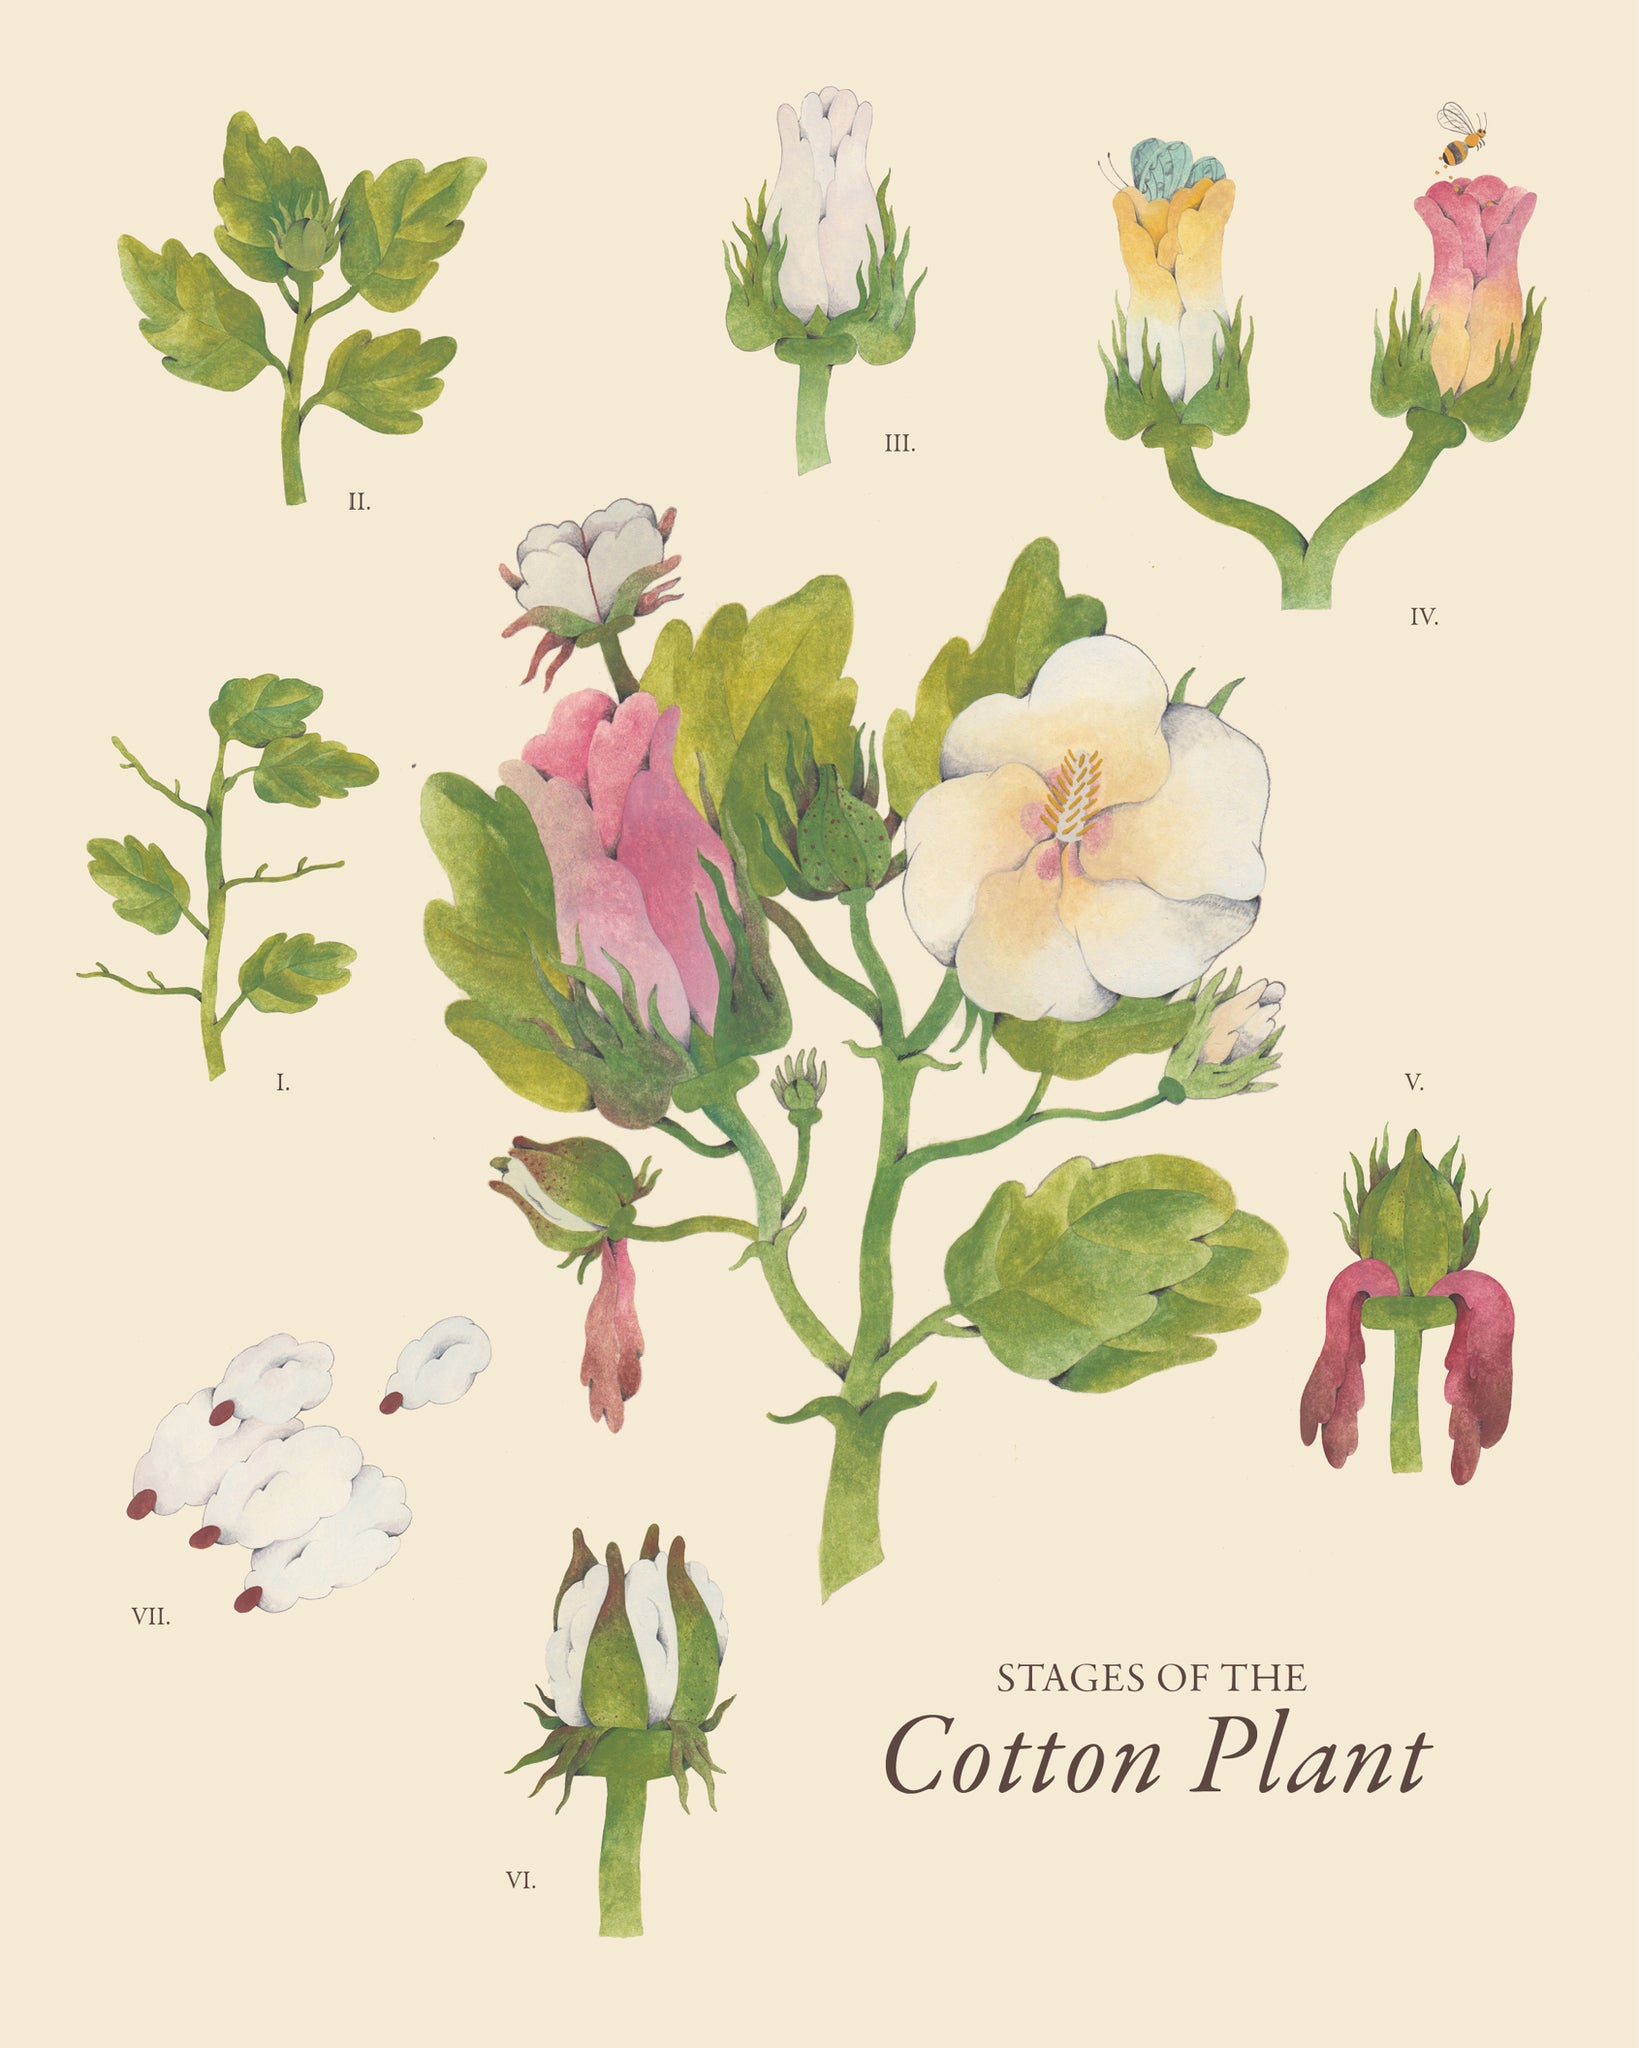 Stages of the Cotton Plant